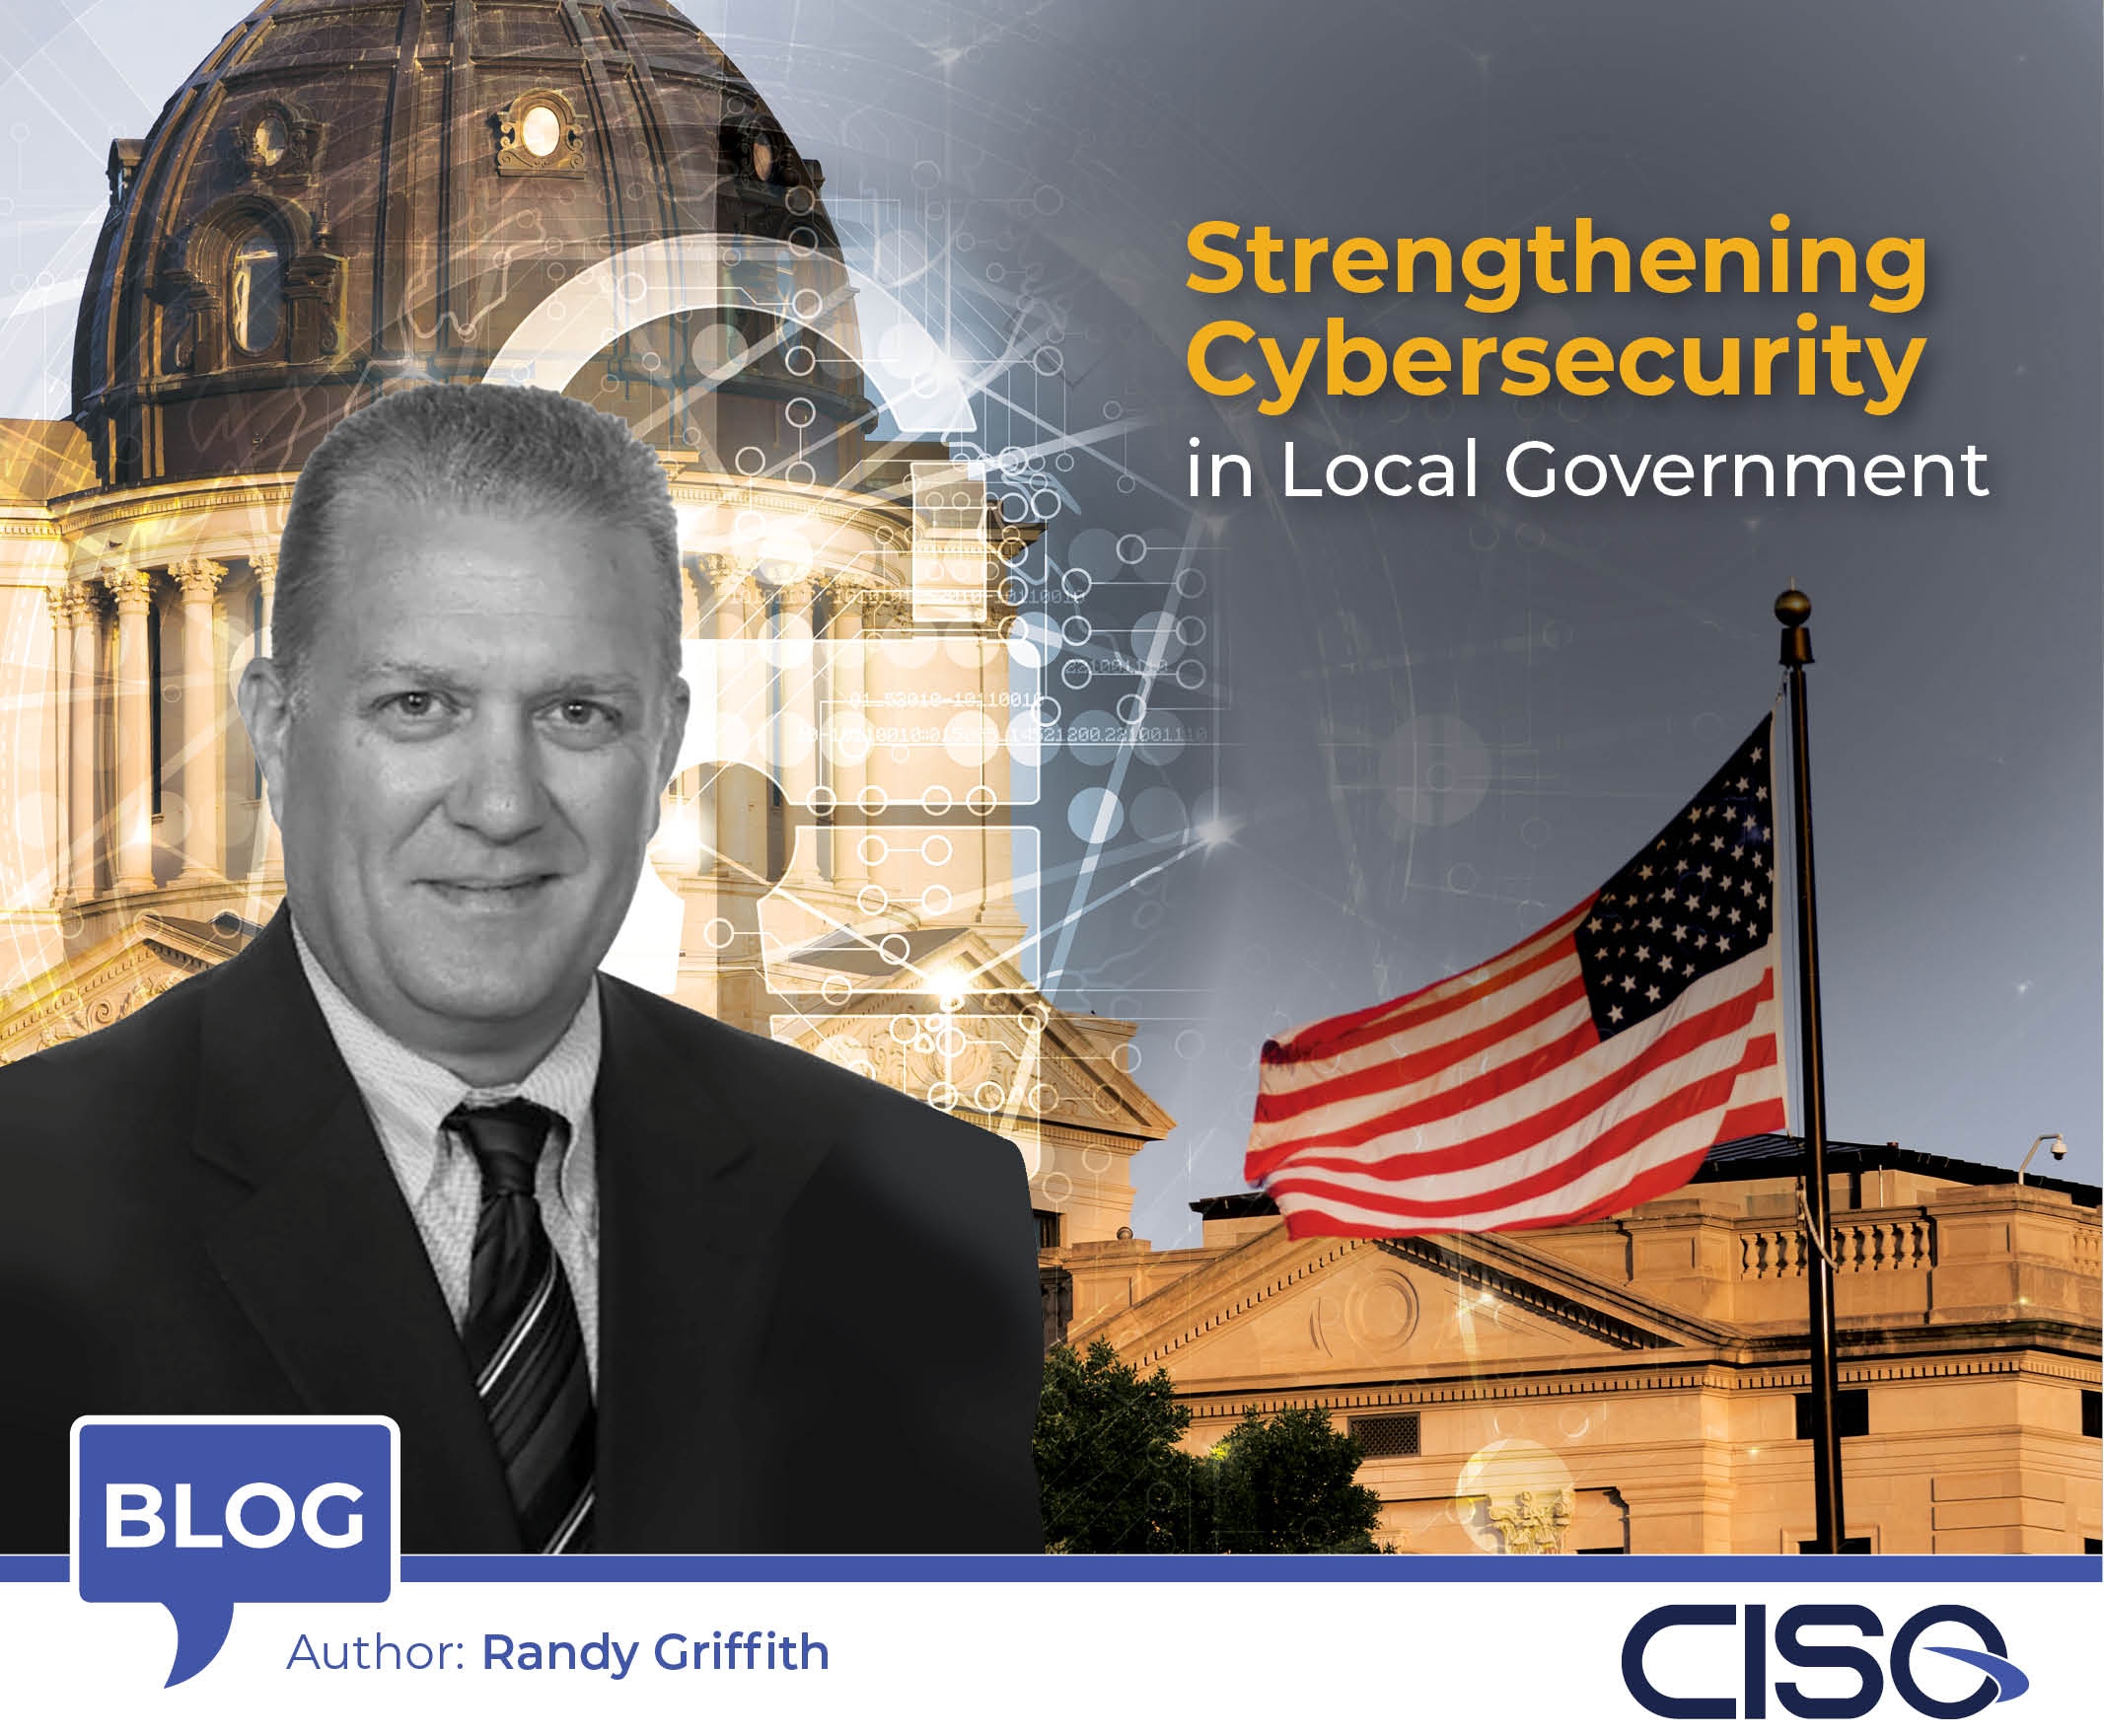 Strengthening Cybersecurity in Local Government